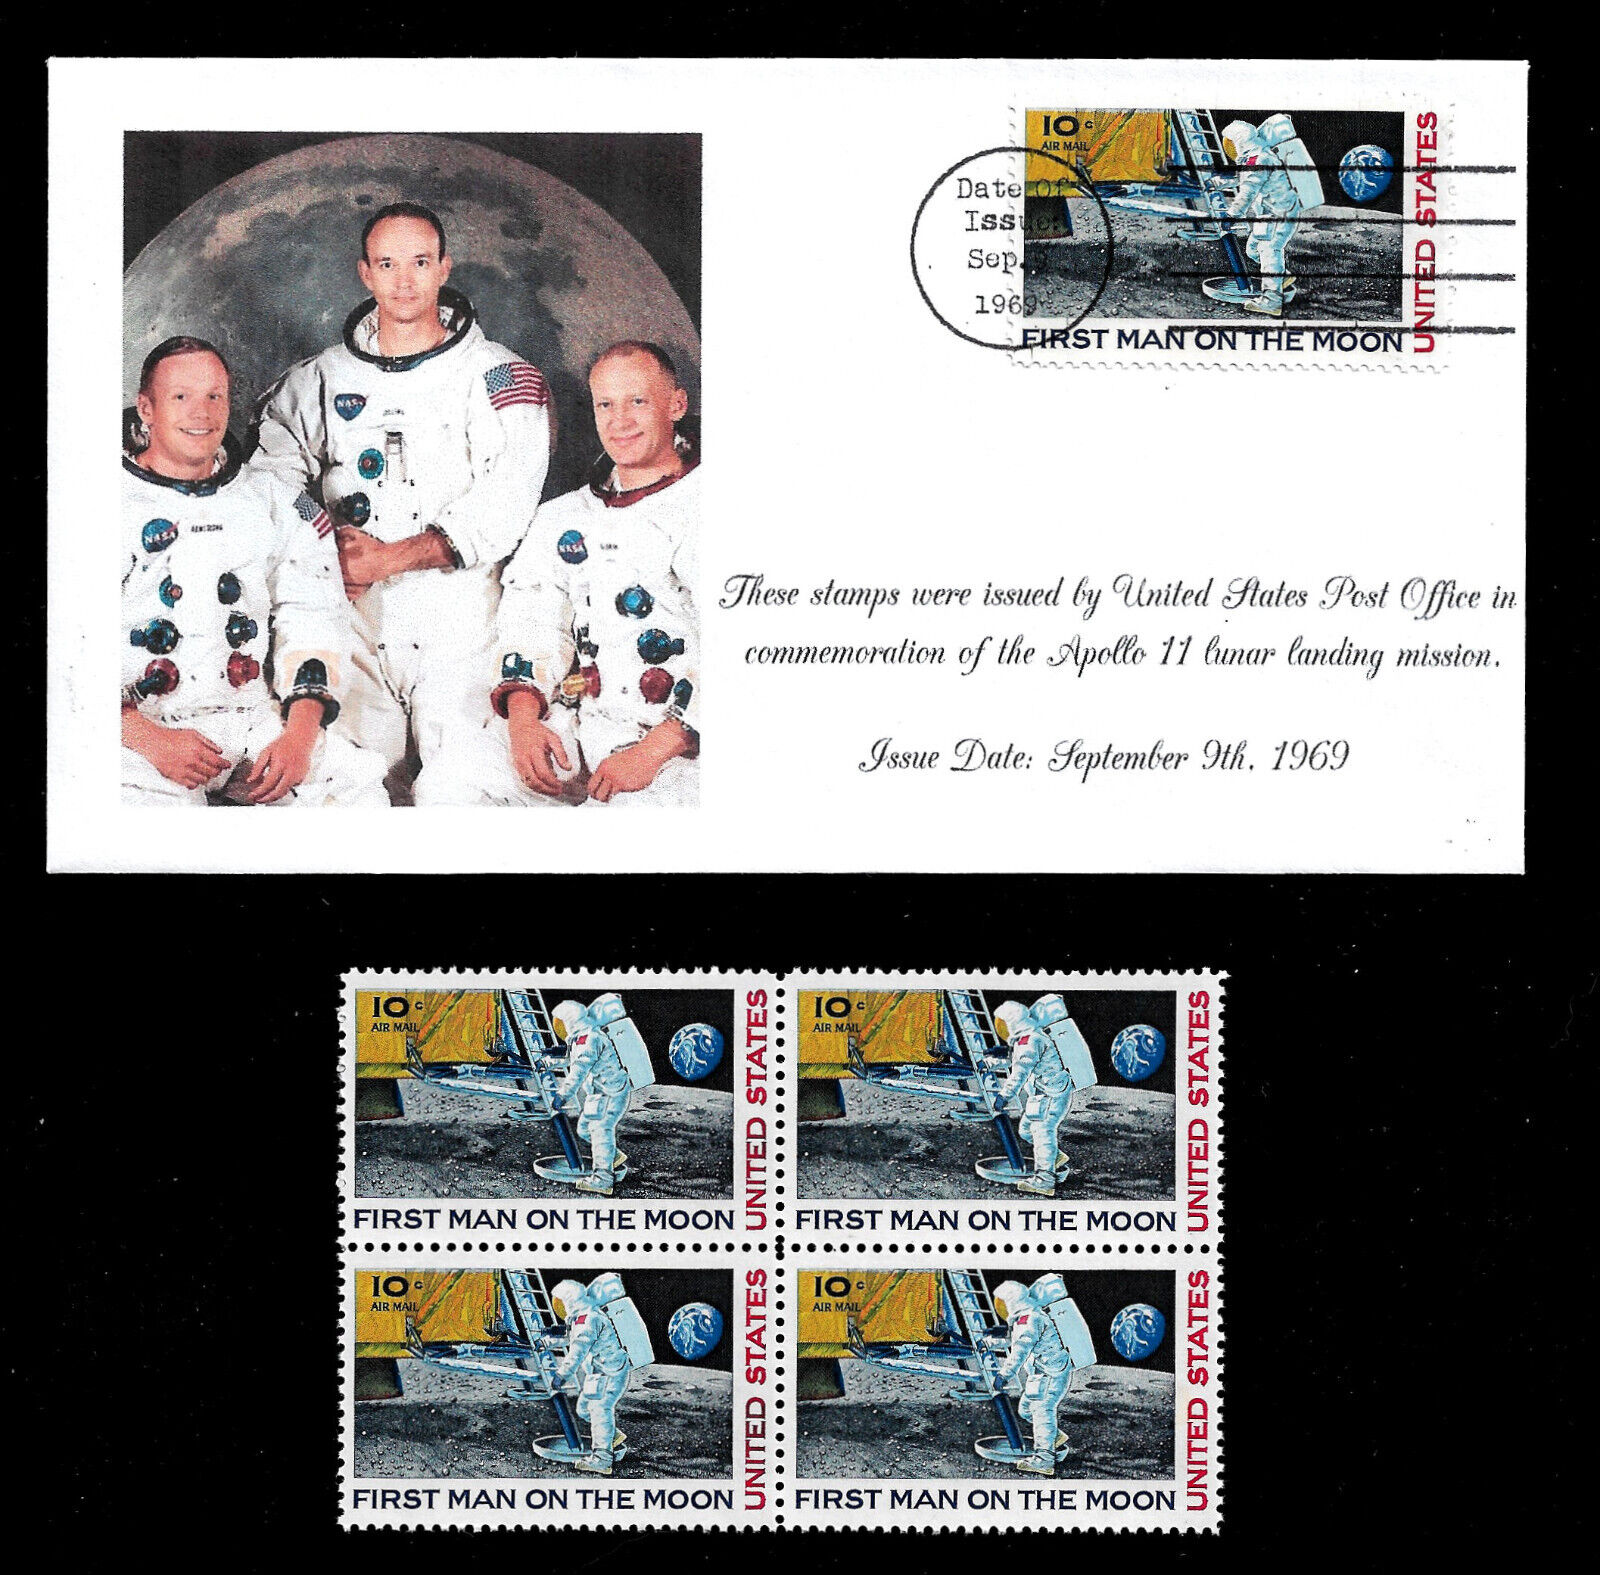 1969 Apollo 11 Lunar Landing Postage Stamps Mint Post Office Fresh Condition